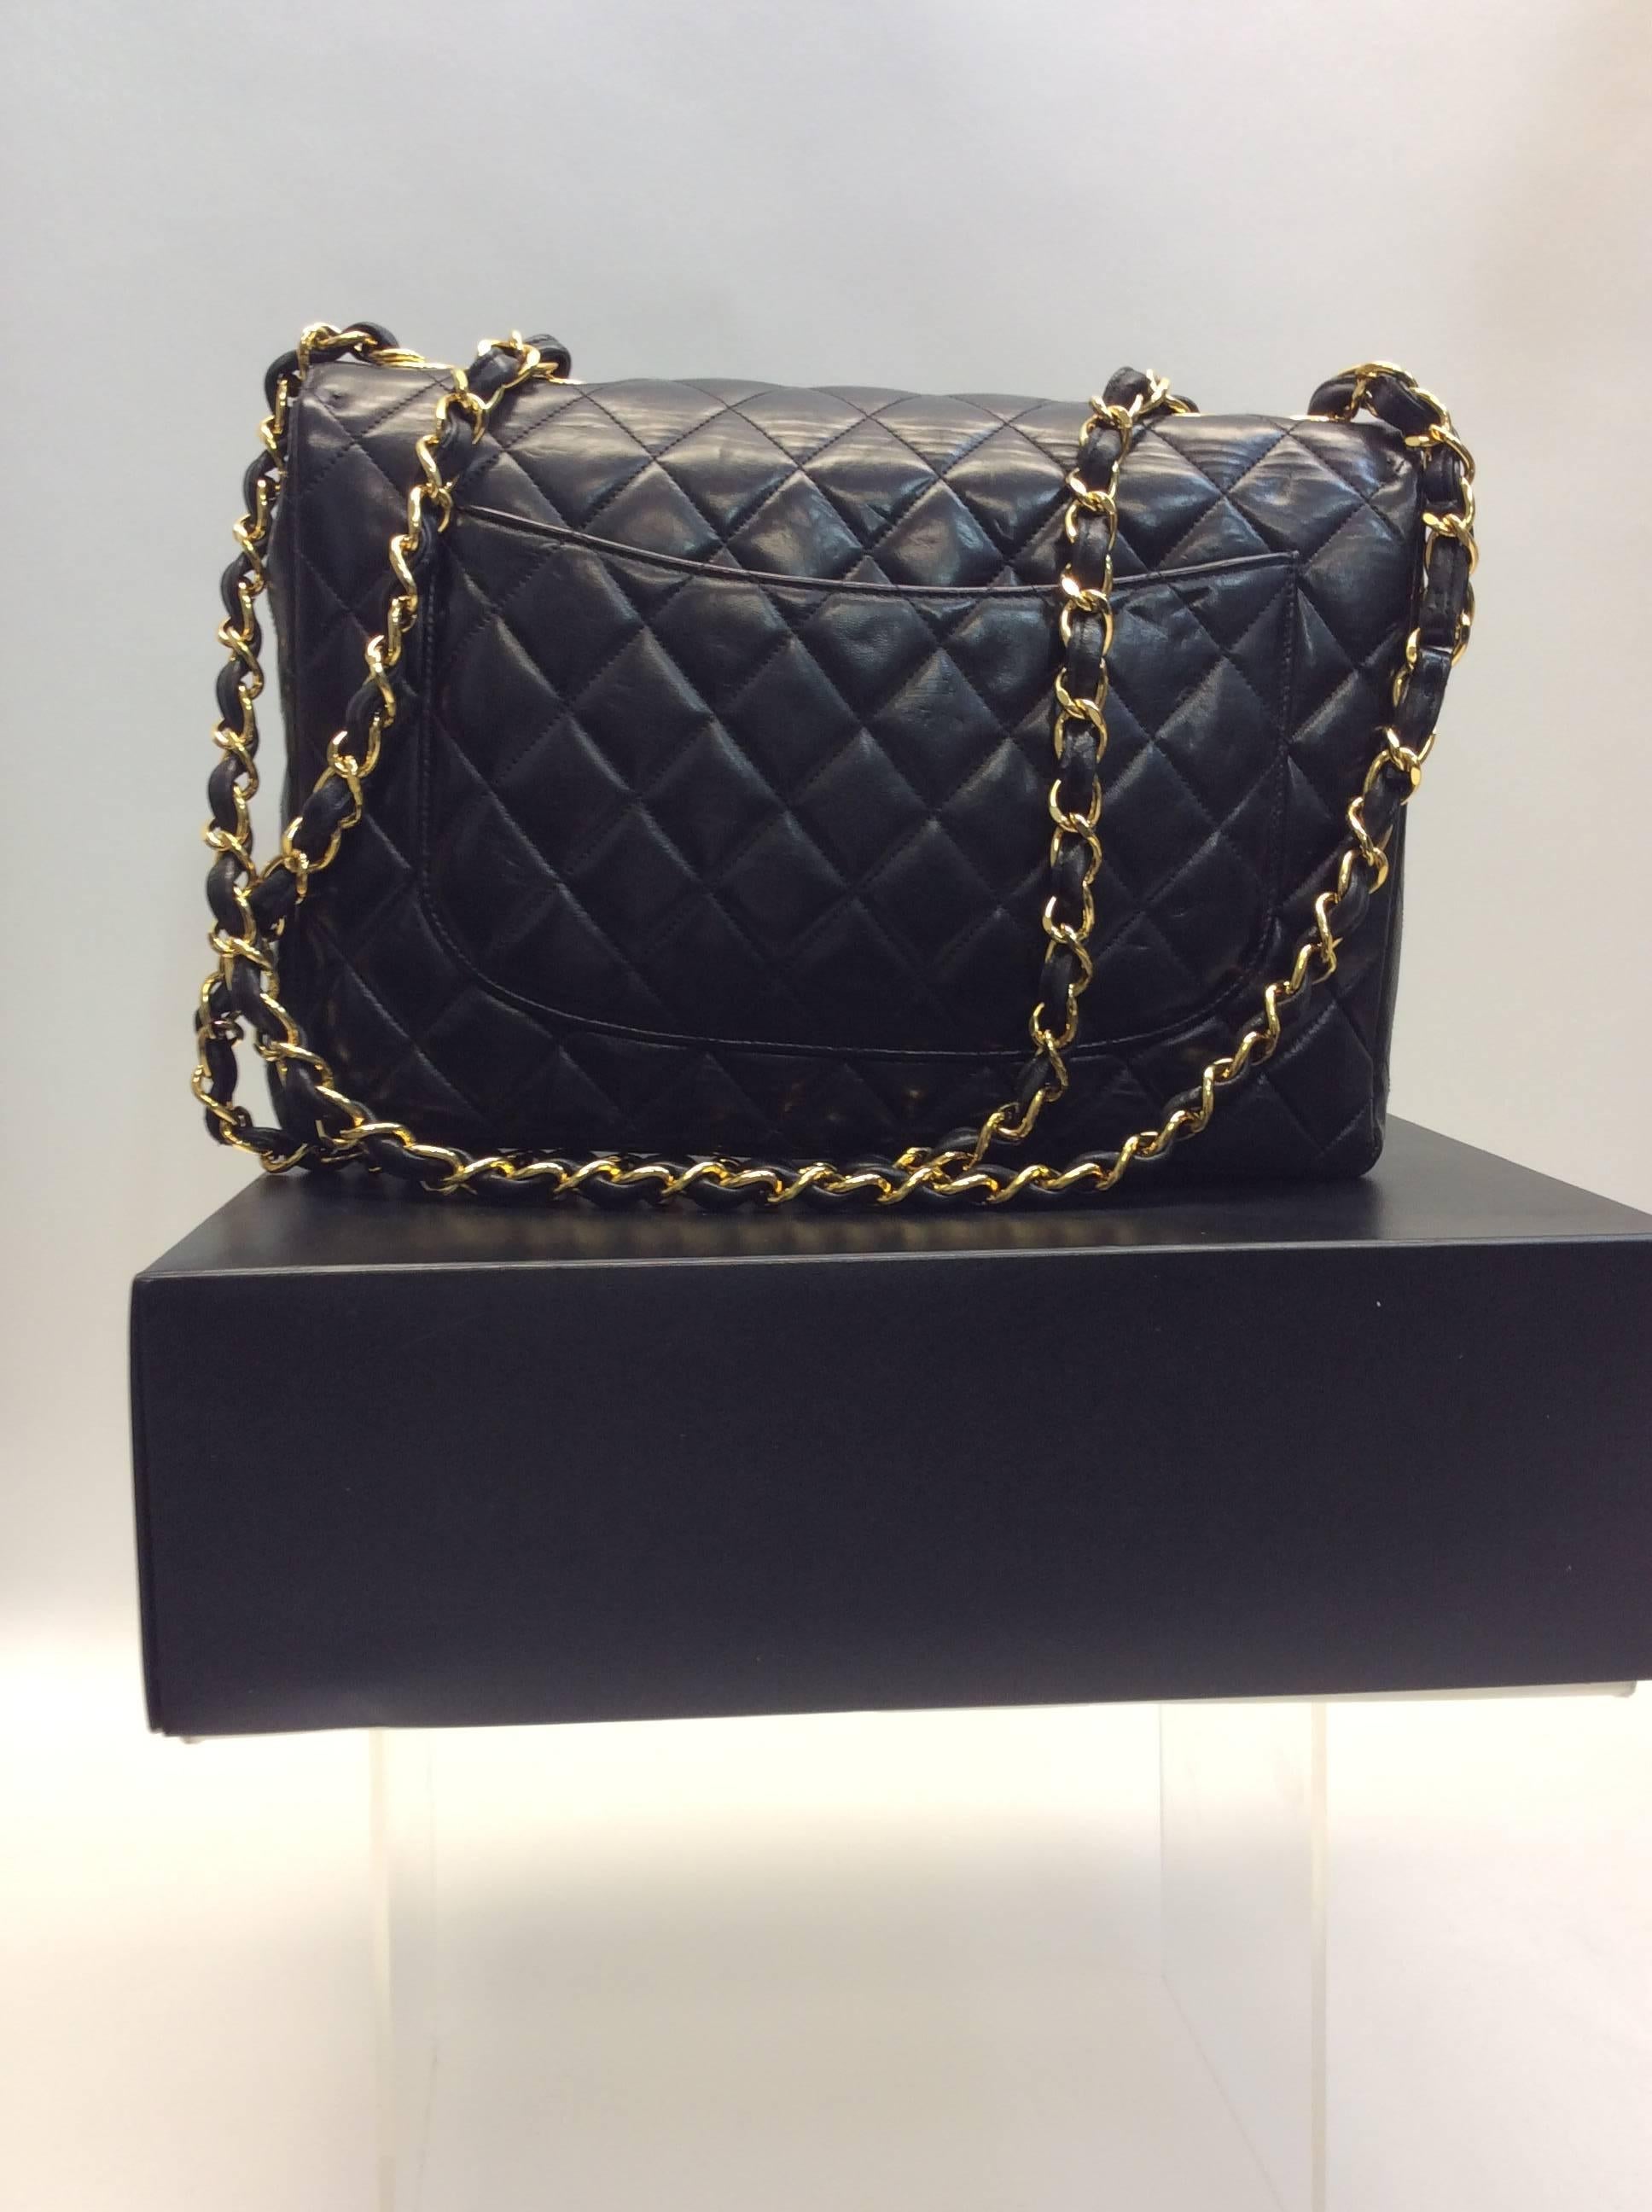 Black Quilted Flap Leather Chanel Bag With Box In Excellent Condition For Sale In Narberth, PA